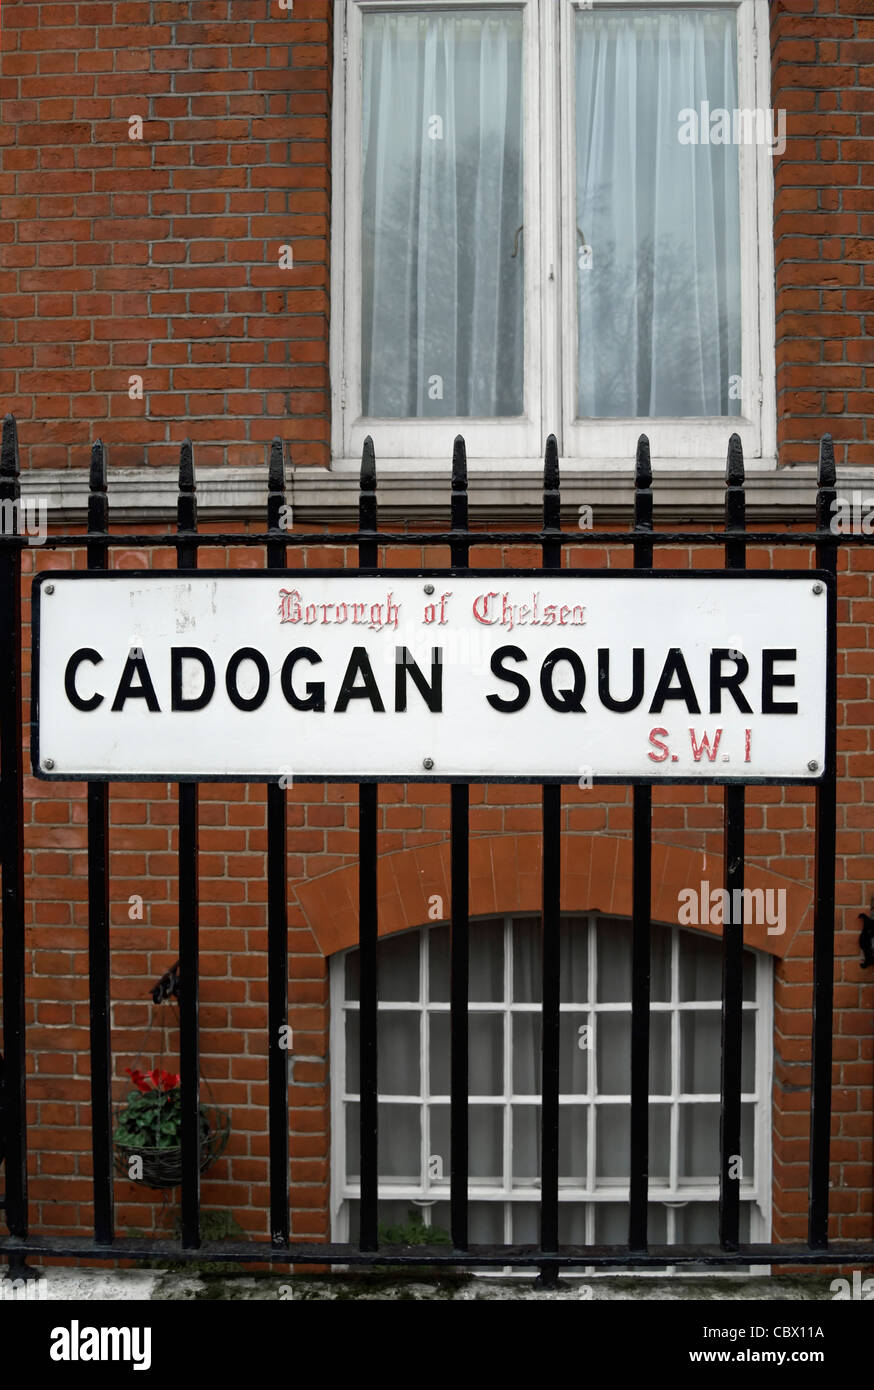 street name sign for cadogan square, chelsea, london, still bearing the name of the former london borough of chelsea Stock Photo